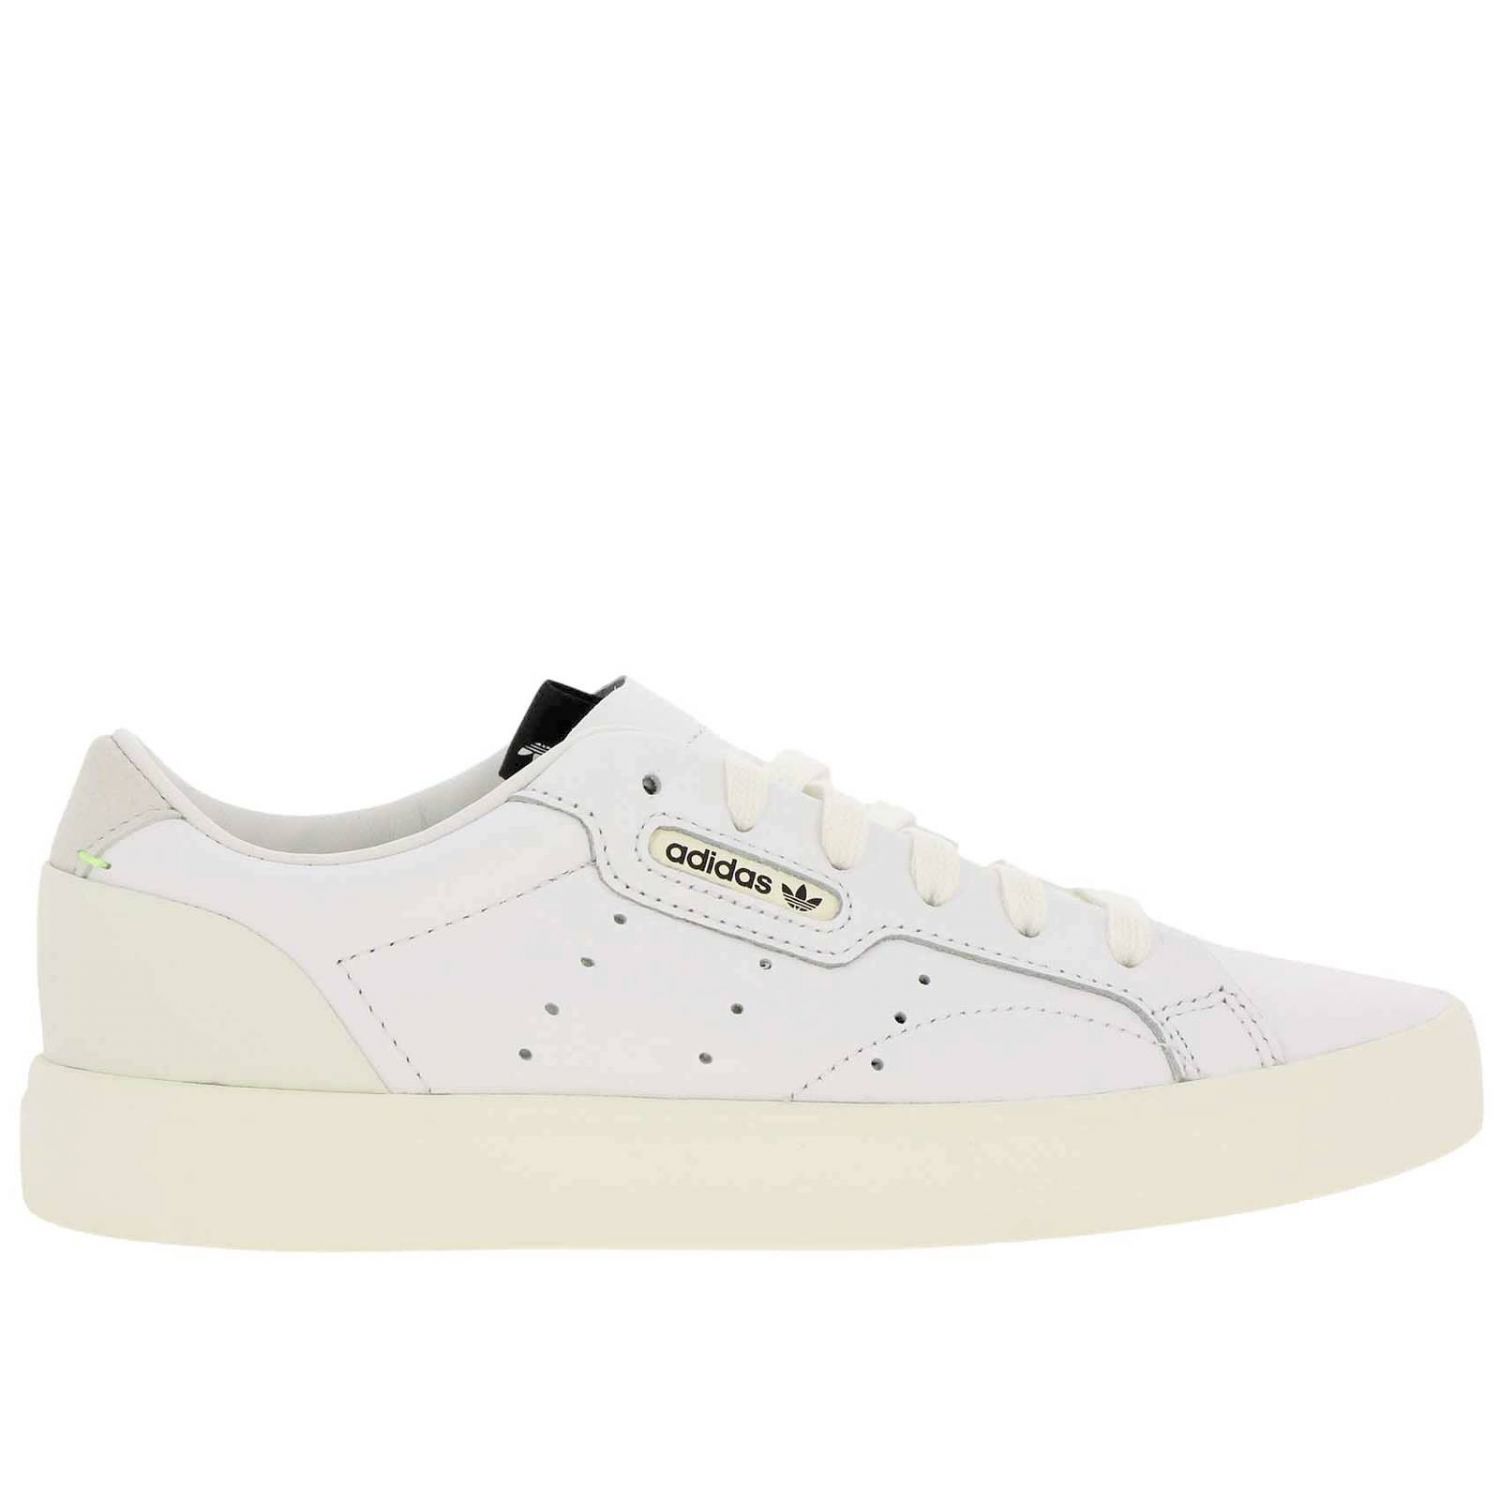 Adidas Originals Outlet: Shoes women - White | Sneakers Adidas ...